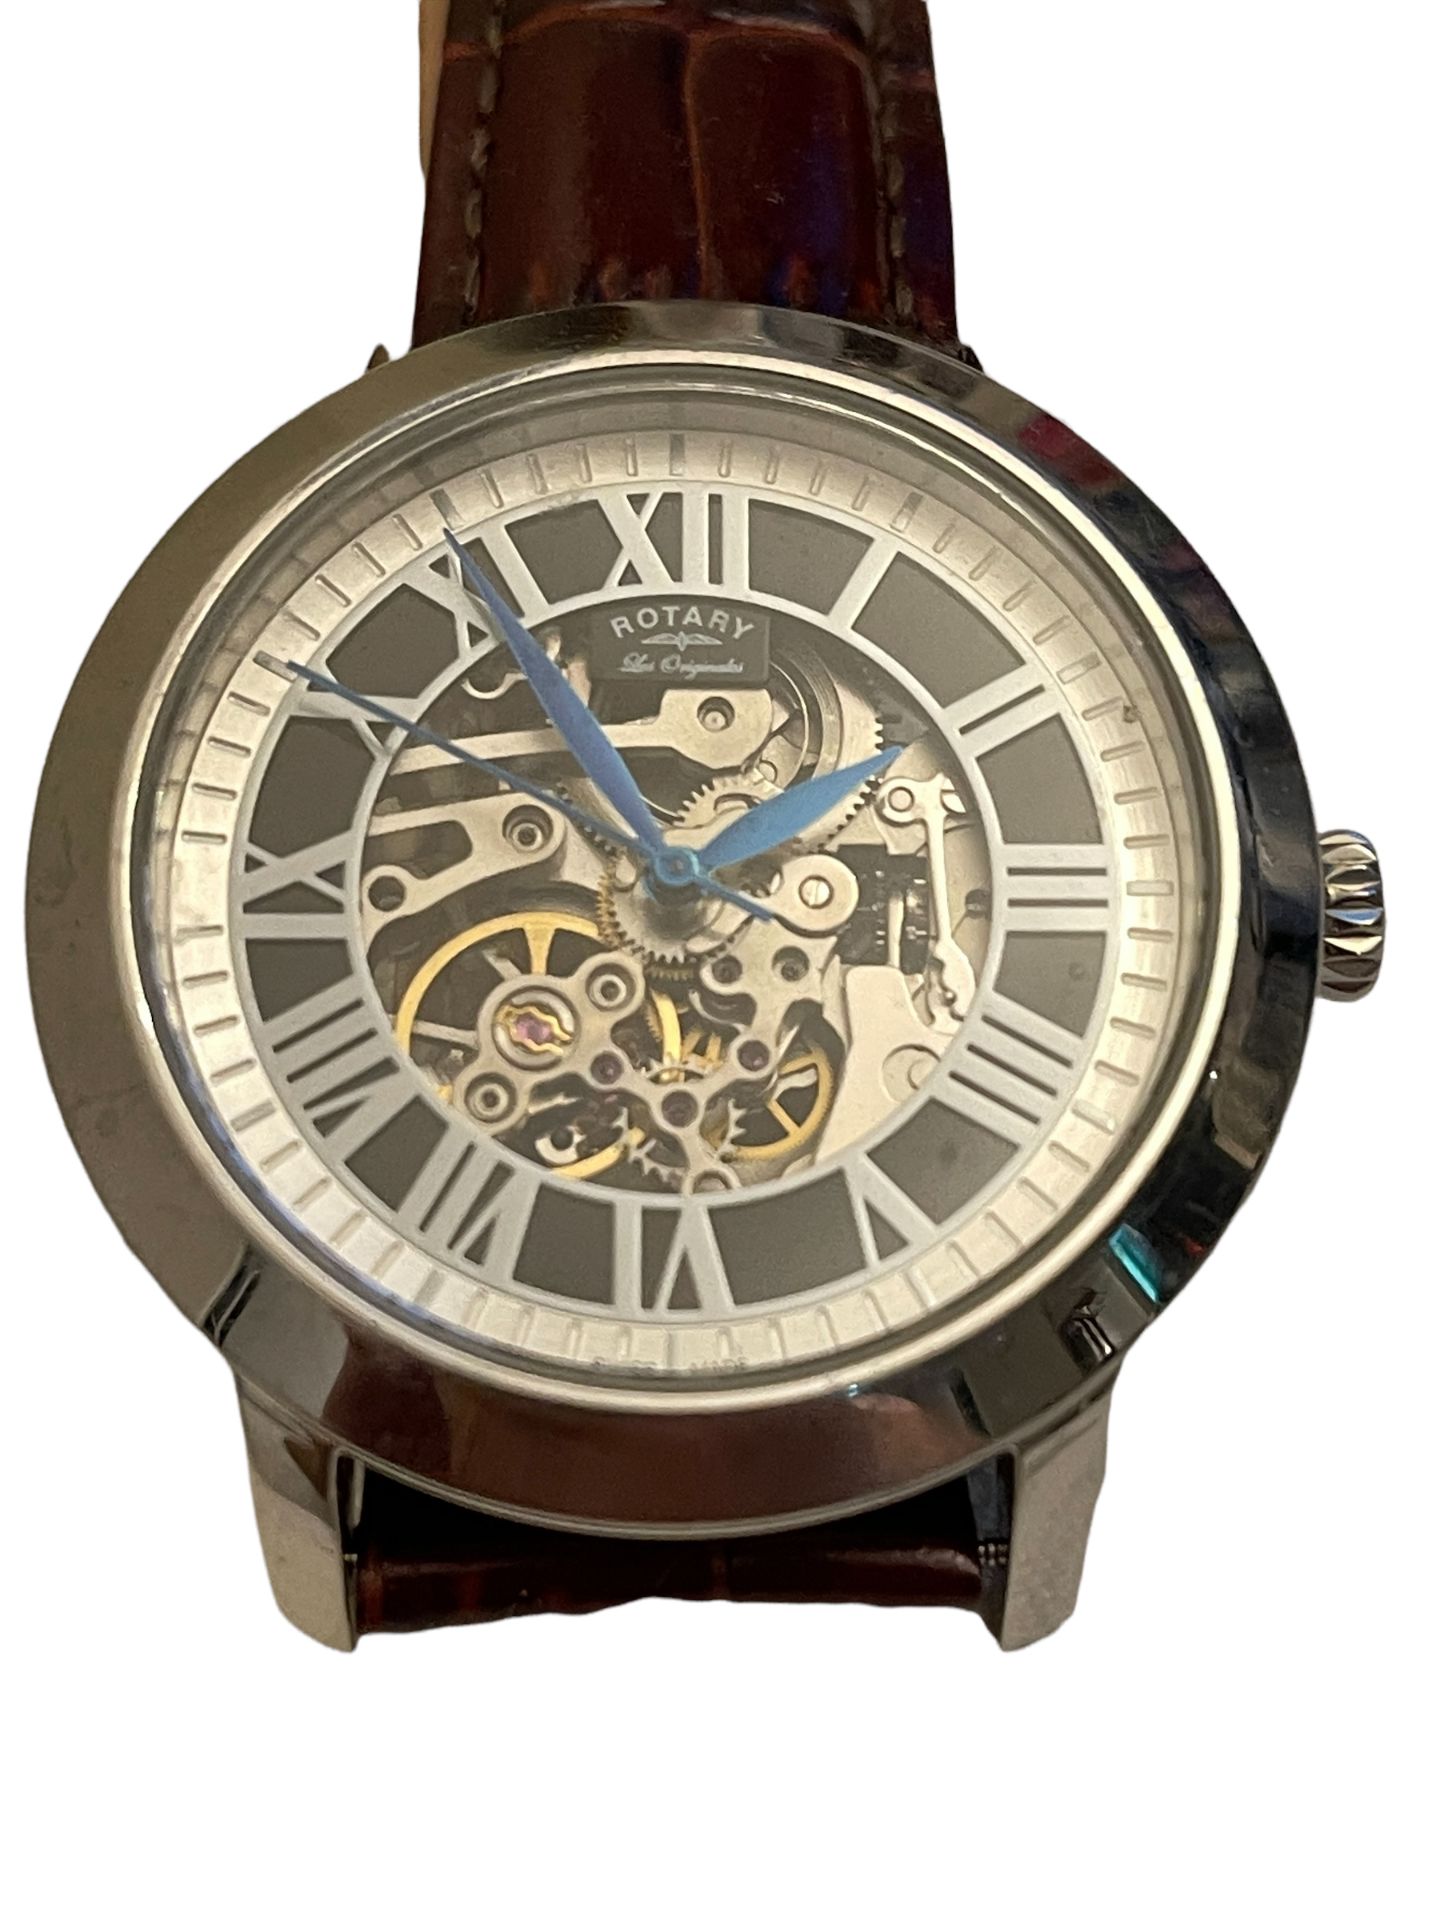 Swiss made less original Men's Automatic Skeleton Watch - Ex Demo or Return Stock - Image 2 of 11